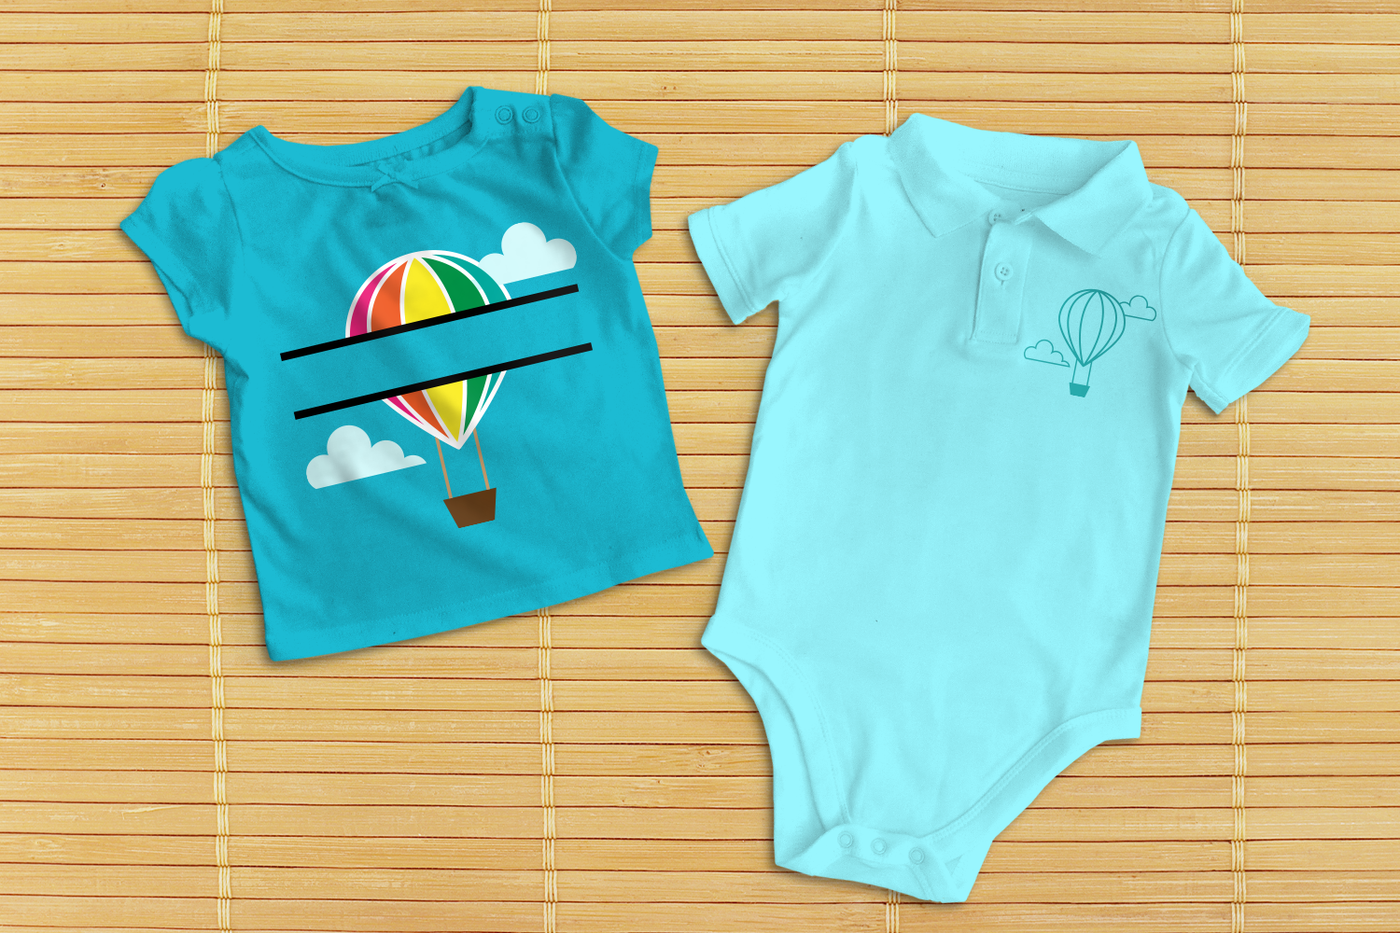 Two children's shirts. Each has a hot air balloon with clouds. One has a split in the middle.